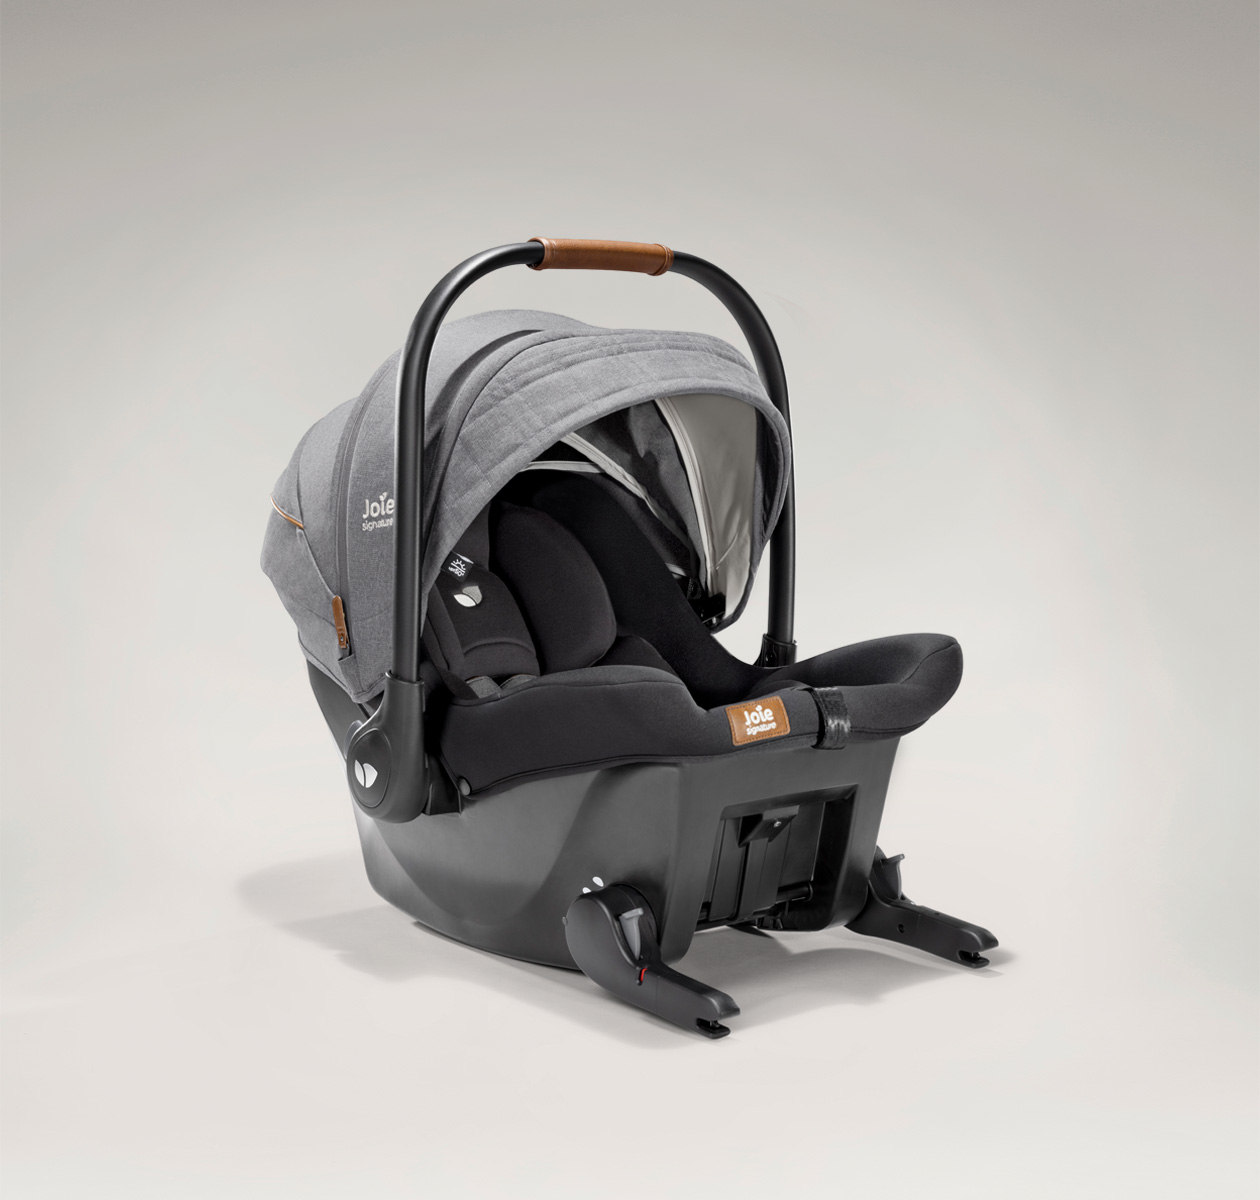 Infant Carriers, Toddler Car Seats & Big Kid Boosters| Explore Joie